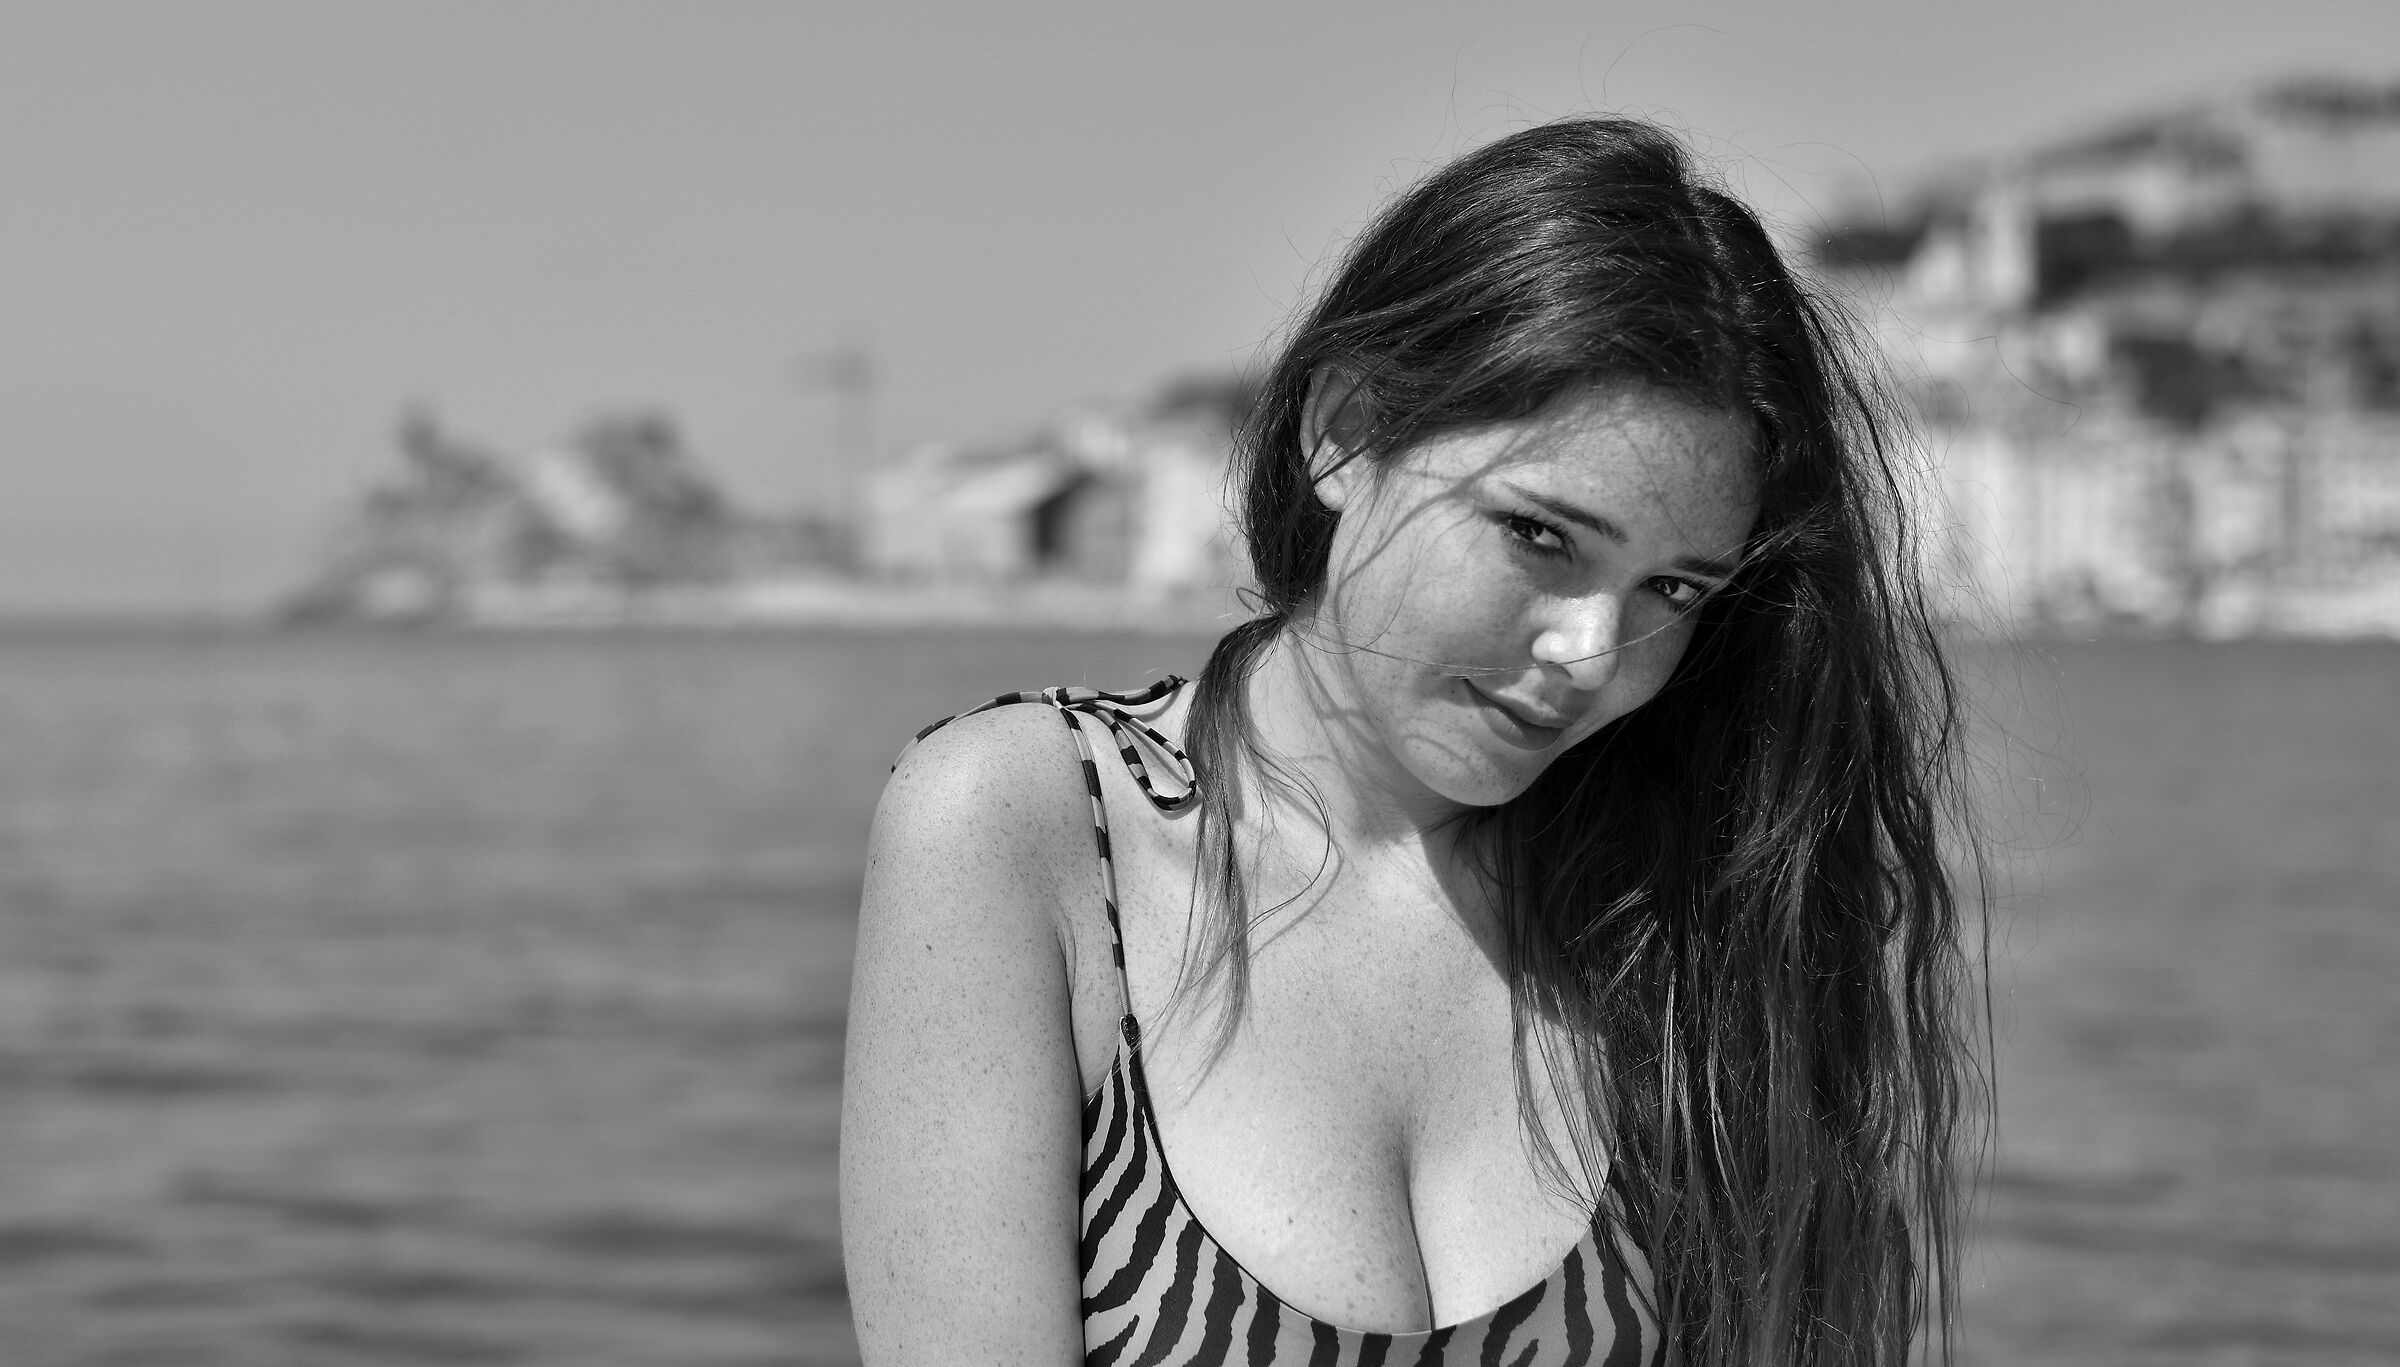 A day at the beach in black and white......